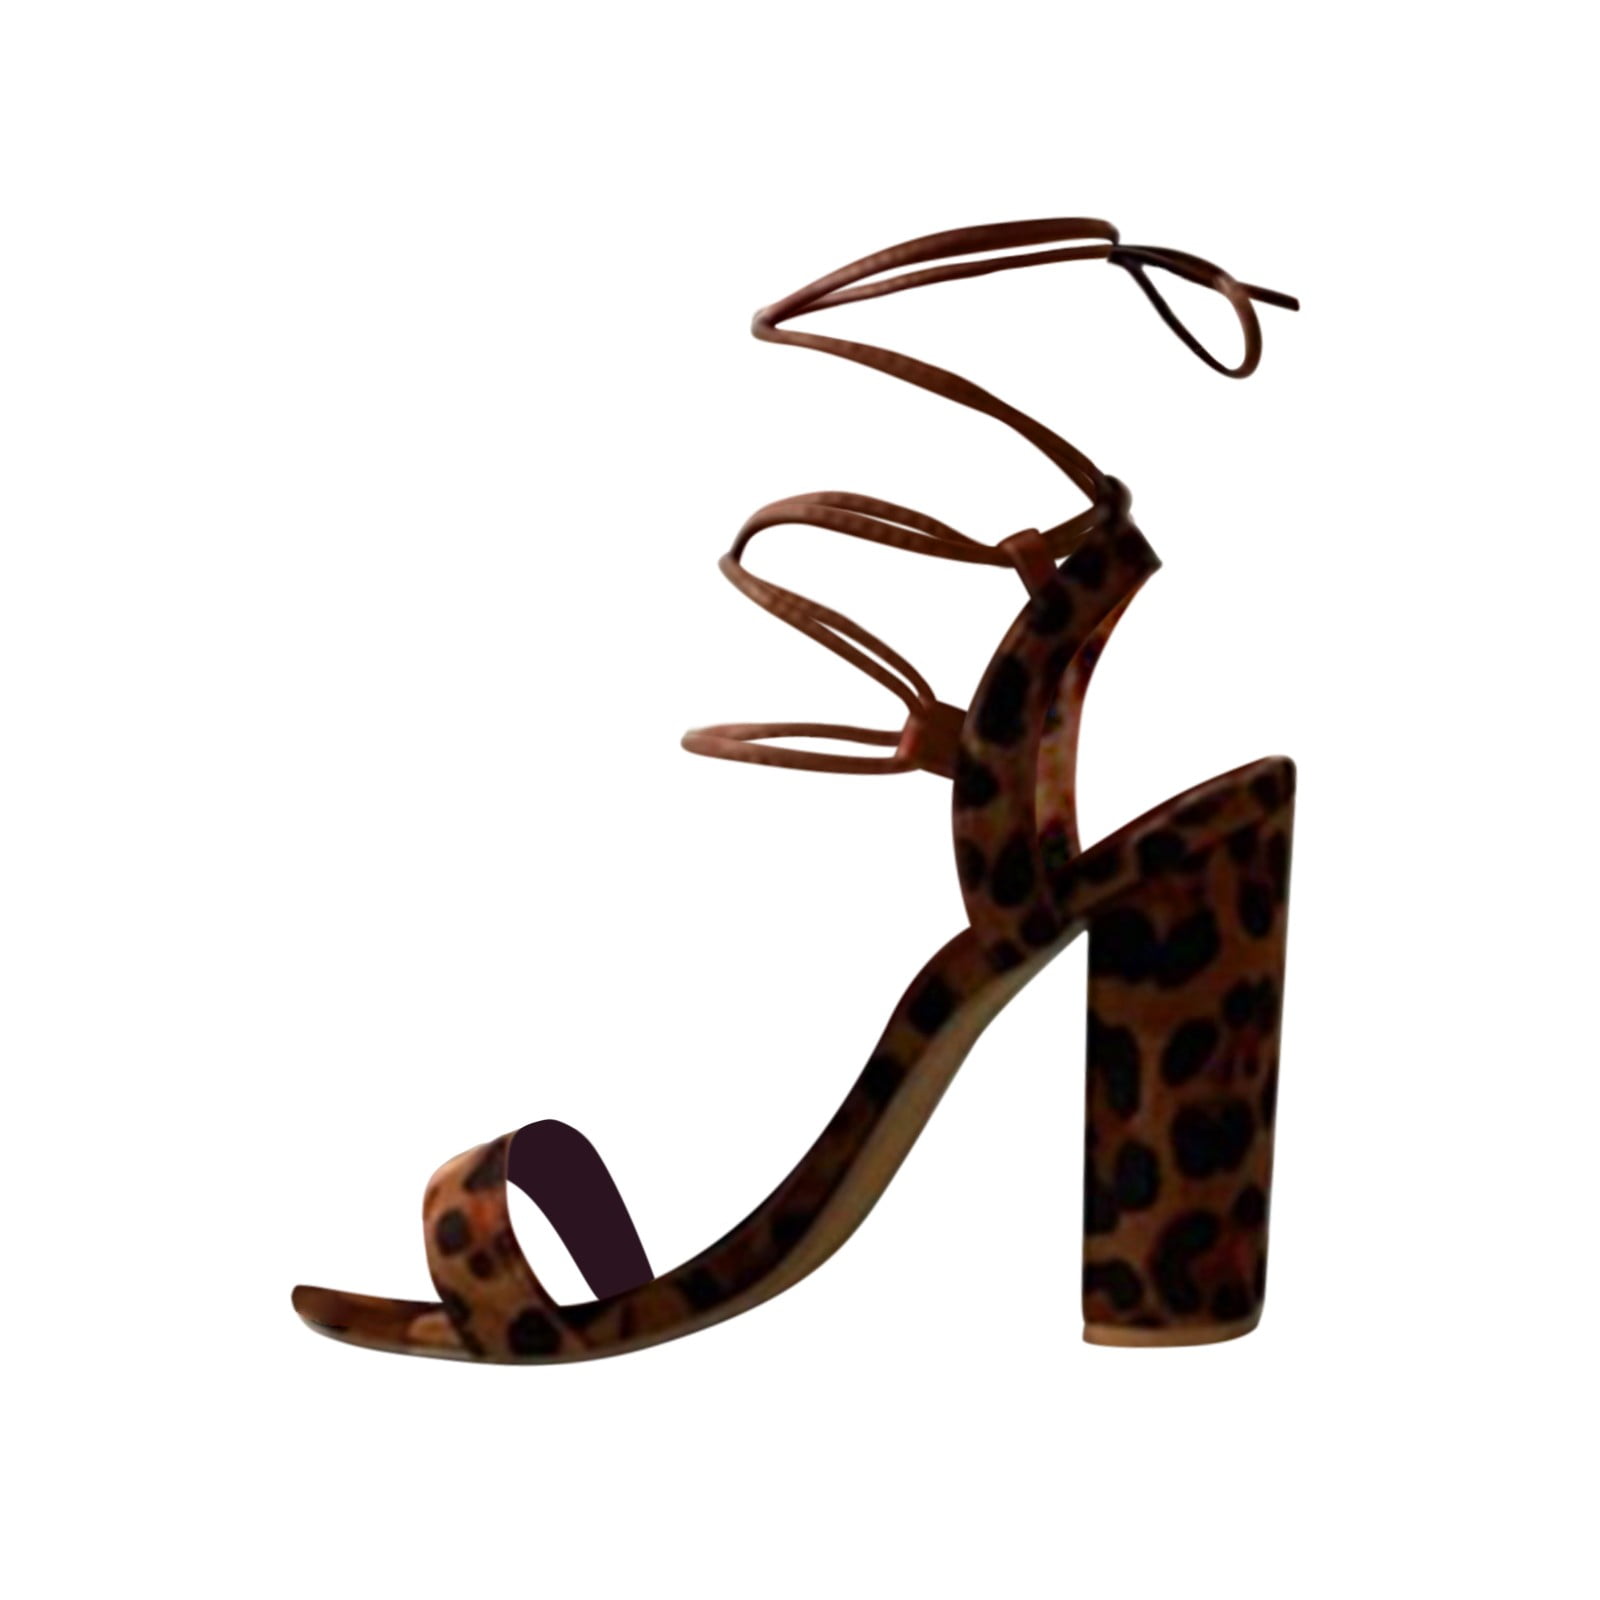 ASOS DESIGN Hatty barely there heeled sandals in leopard print | ASOS